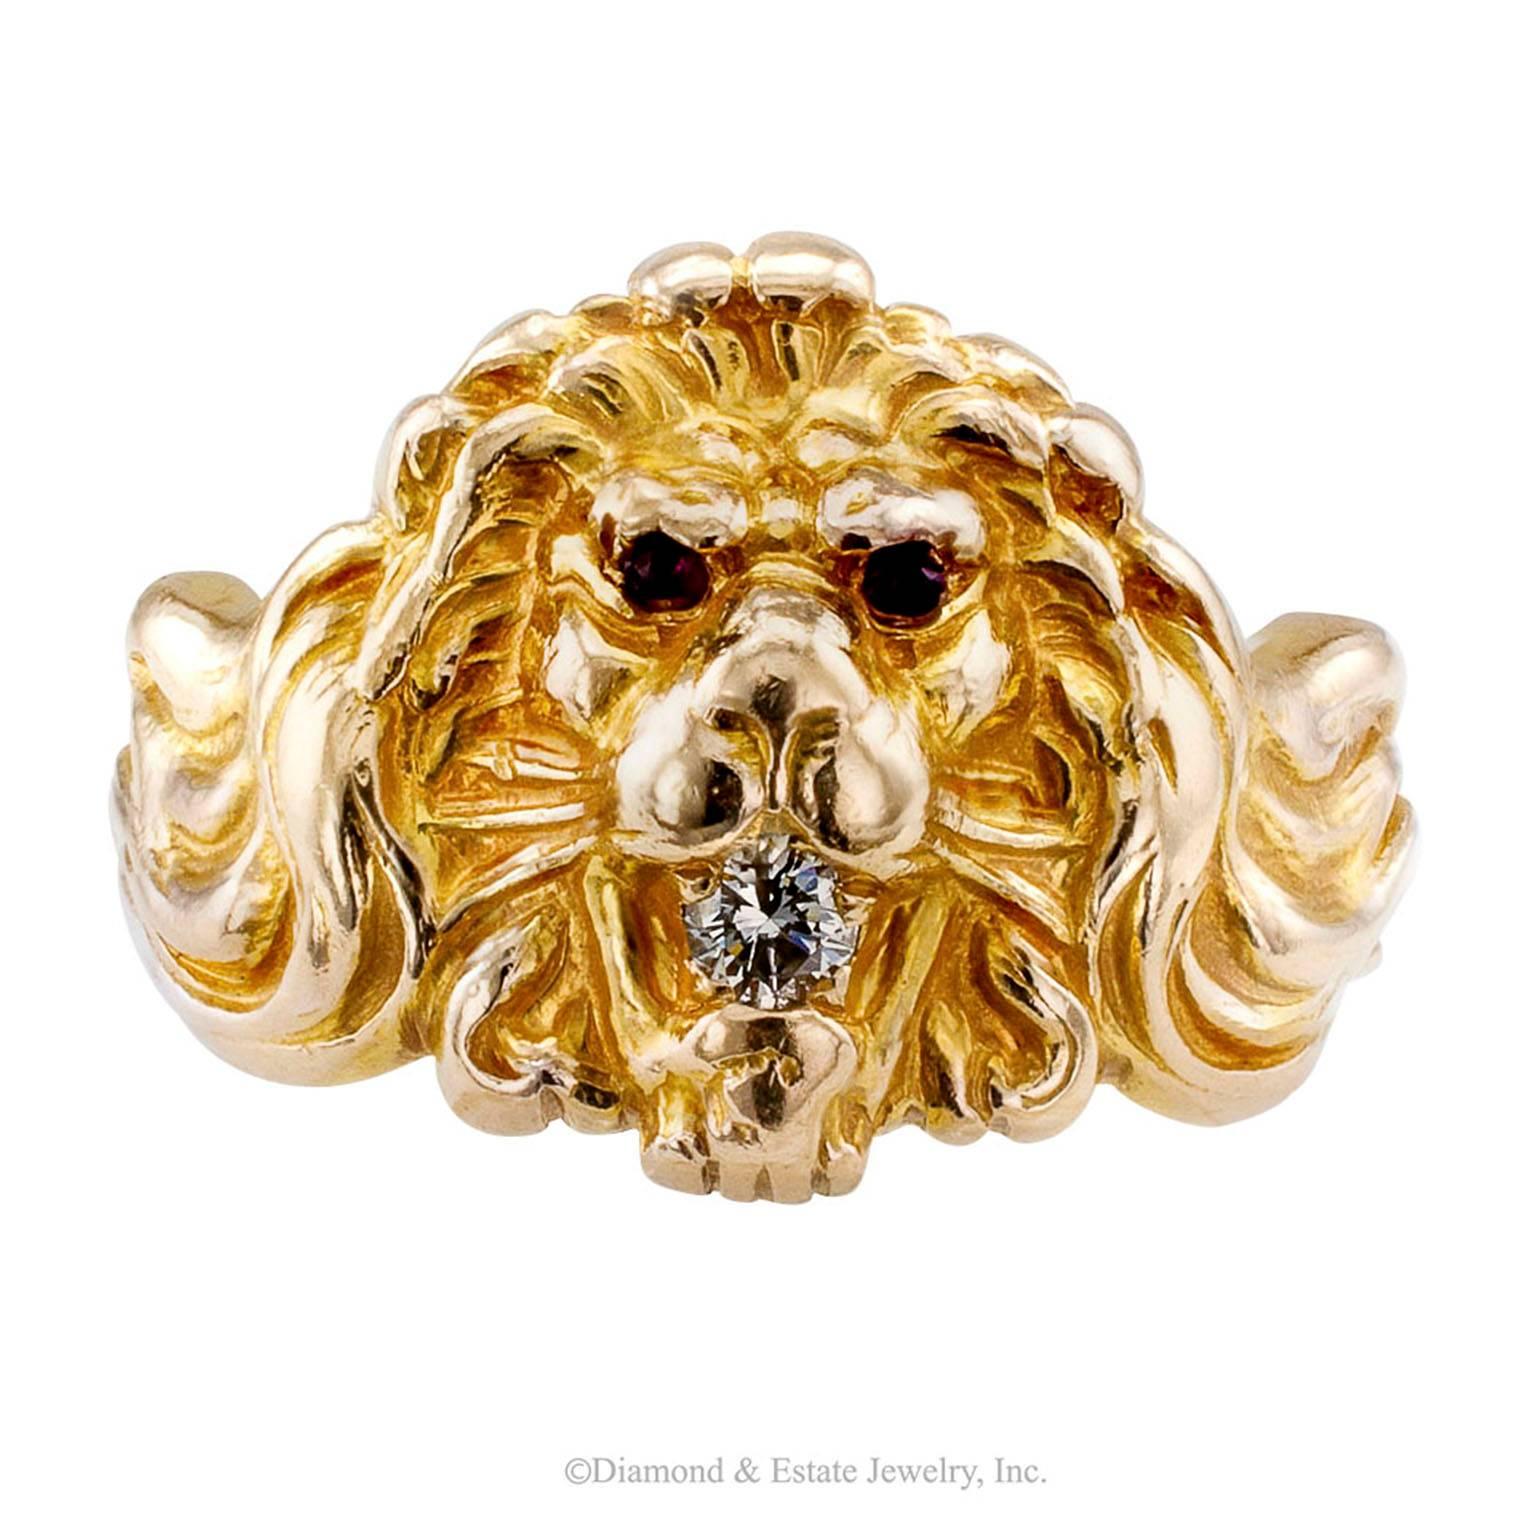 1930s Lion Head Ring Ruby Diamond Gold

Gentleman's 1930s lion head ring with a diamond in the mouth and ruby-set eyes mounted in 14-karat gold with maker's mark for Church & Co.  Behold a lion ring like no other.  Its appearance belies its vintage,